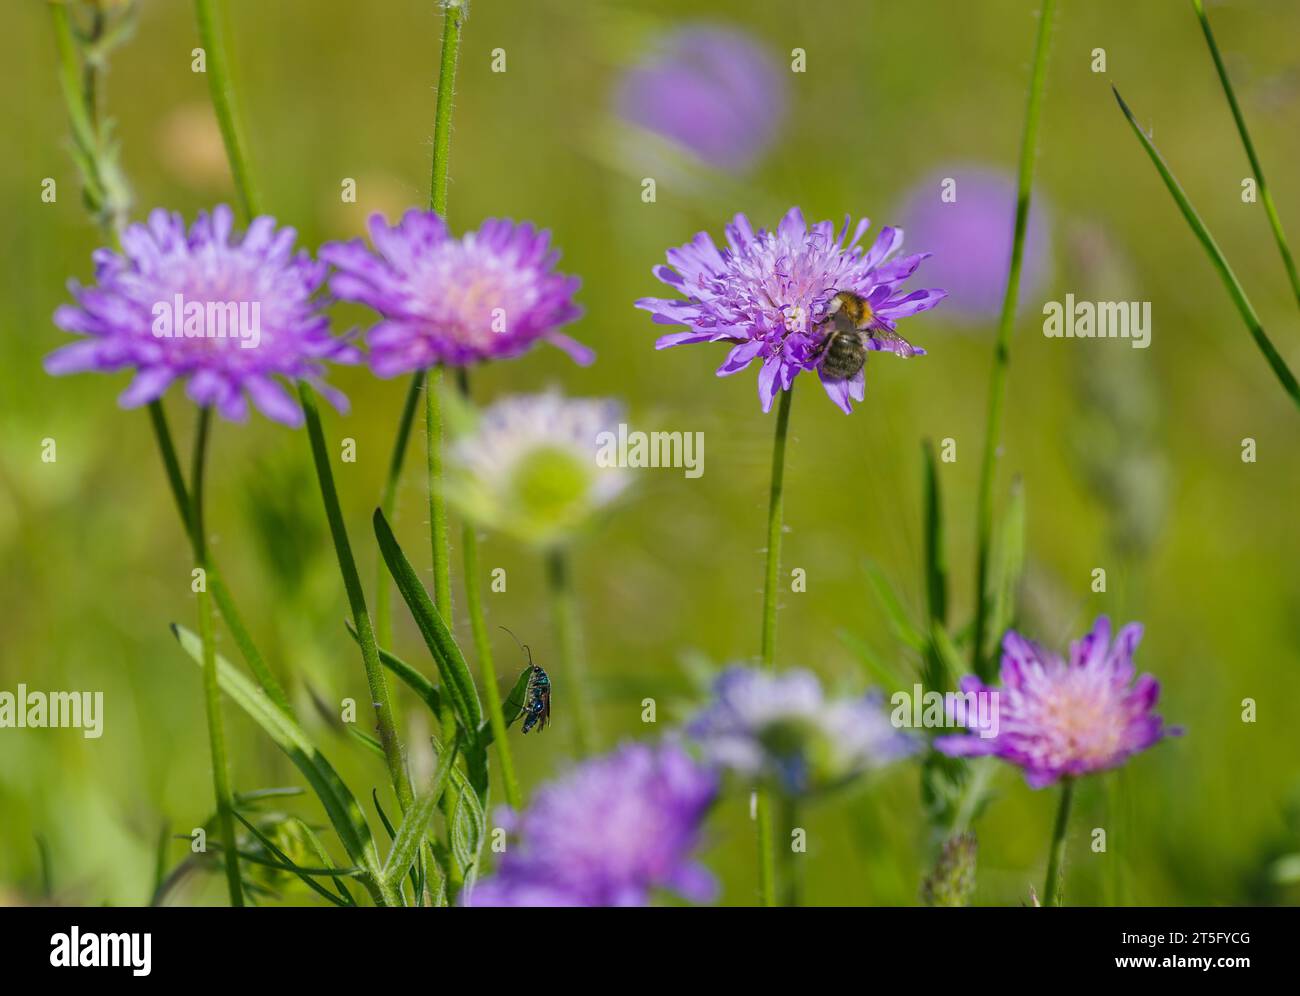 purple blooming Field Scabious or Knautia arvensis flowers Stock Photo